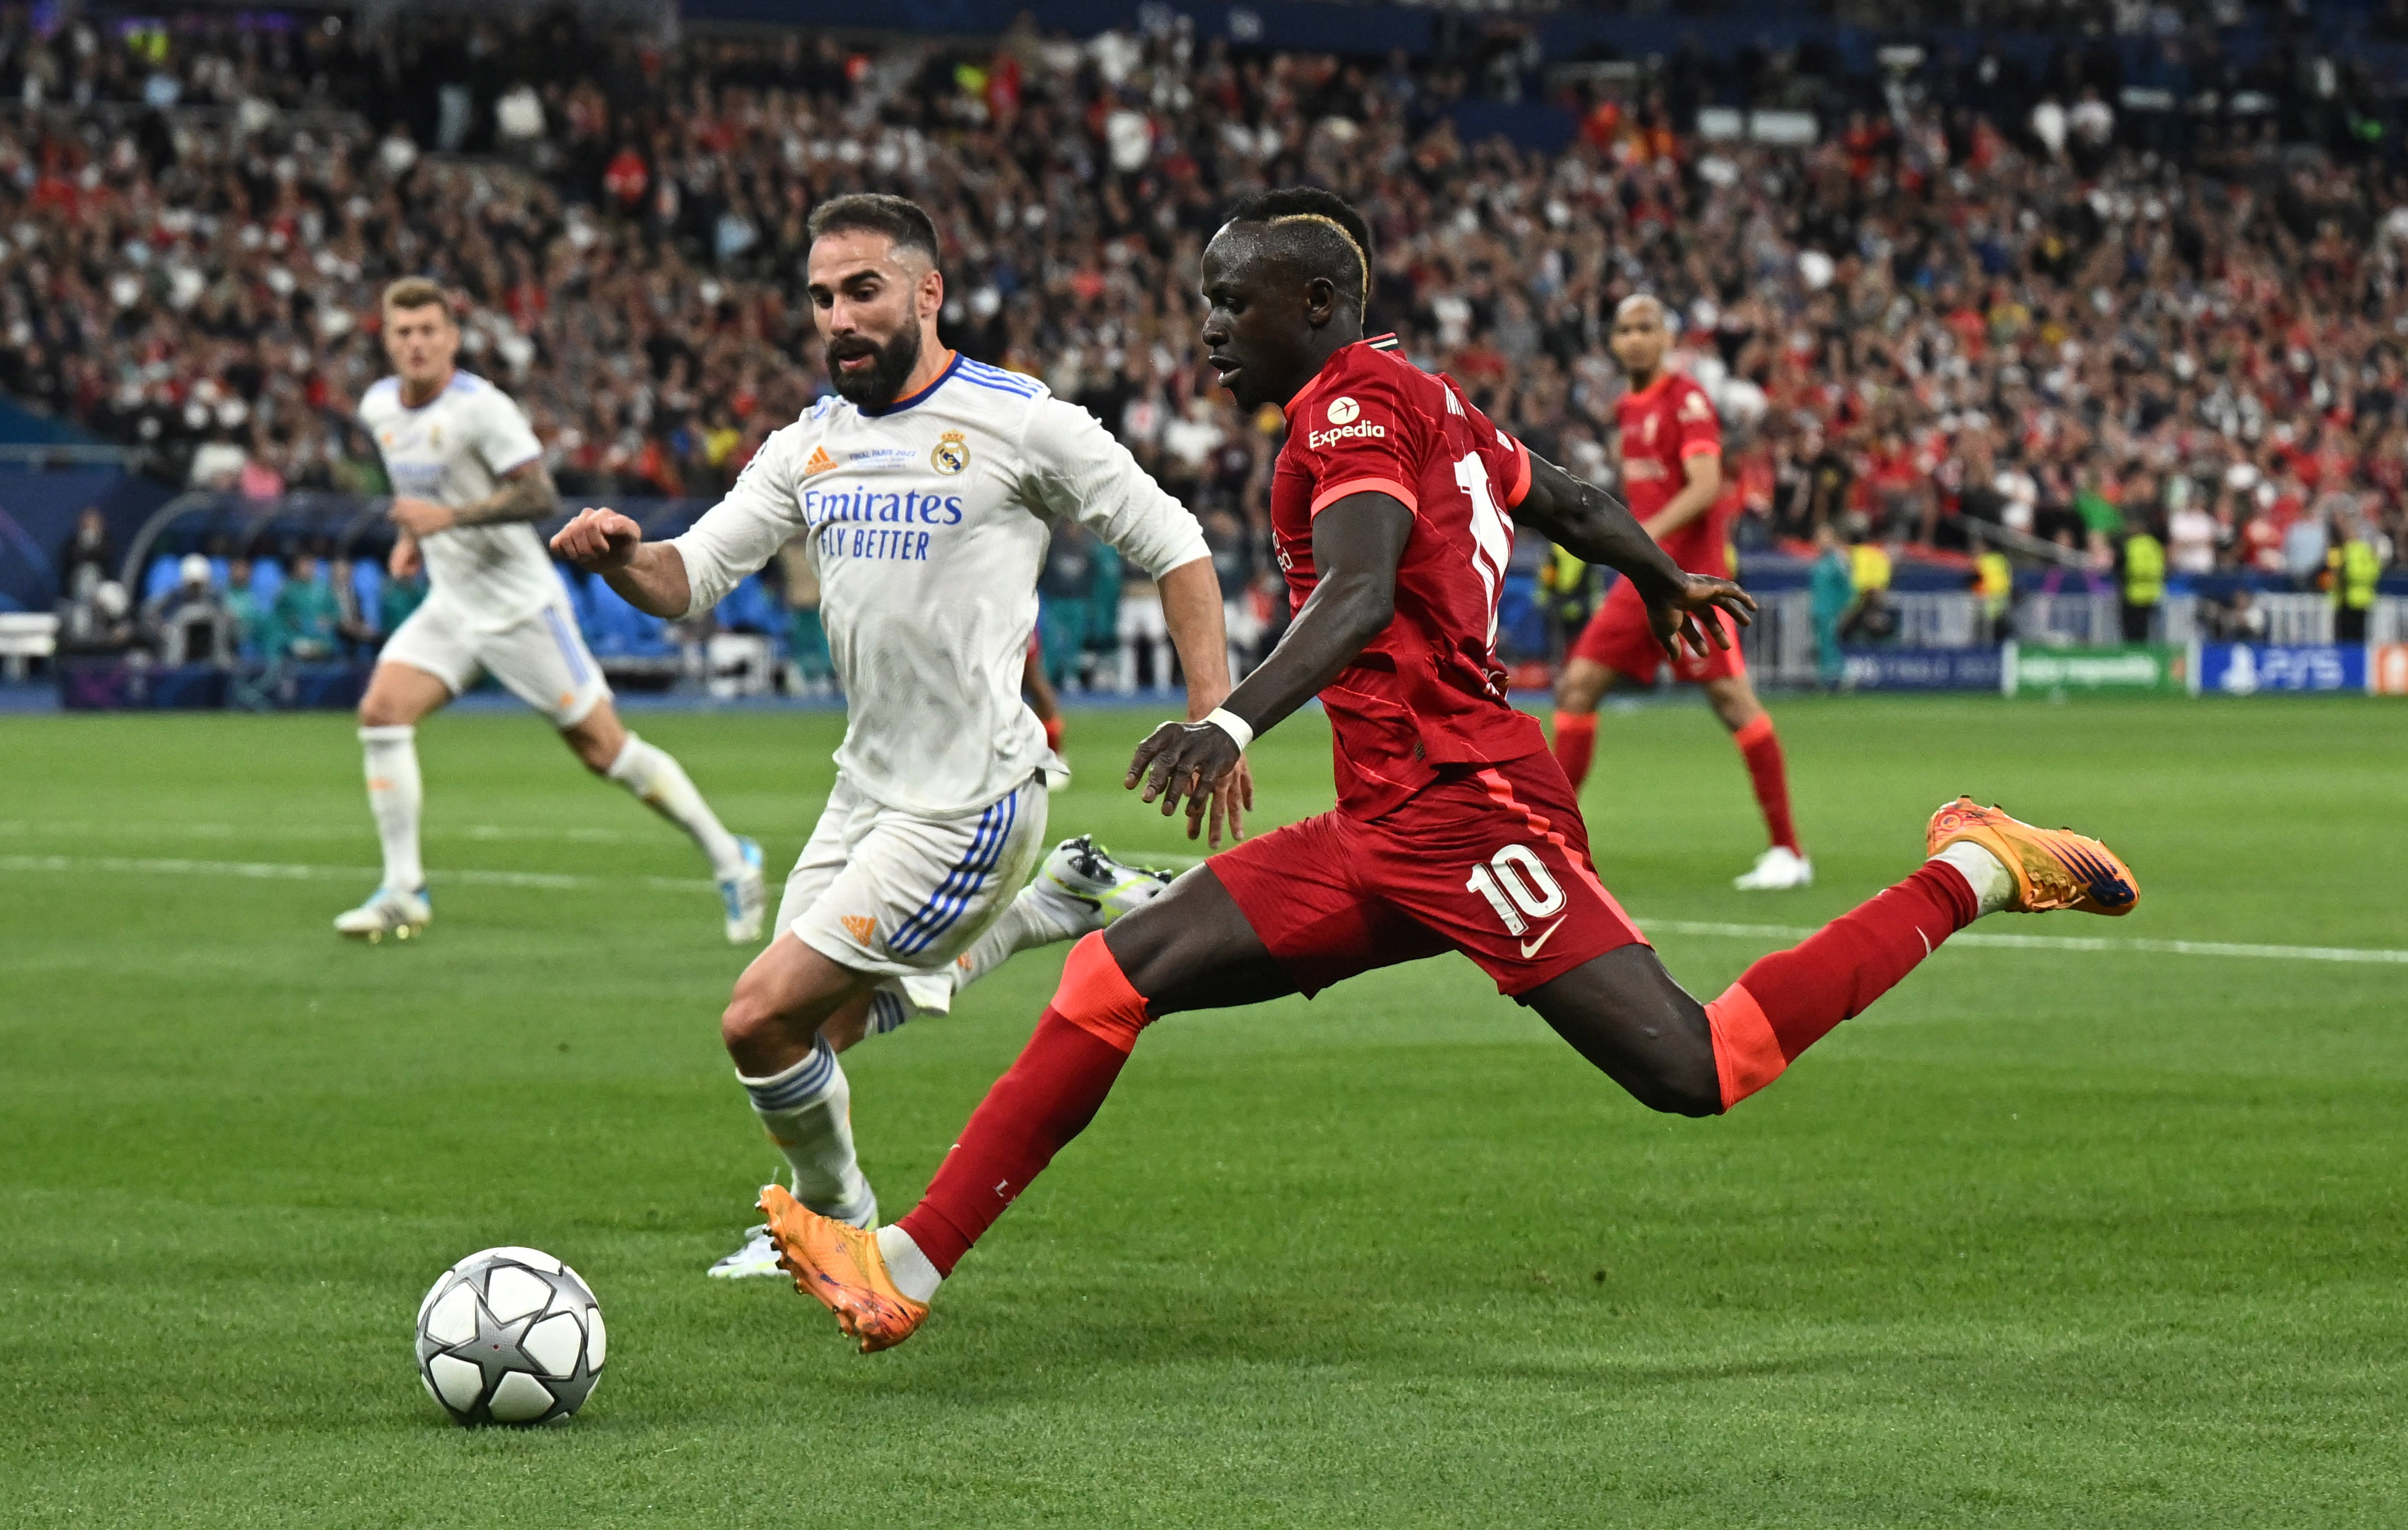 Soccer Football - Champions League Final - Liverpool v Real Madrid - Stade de France, Saint-Denis near Paris, France - May 28, 2022 Real Madrid's Dani Carvajal in action with Liverpool's Sadio Mane REUTERS/Dylan Martinez